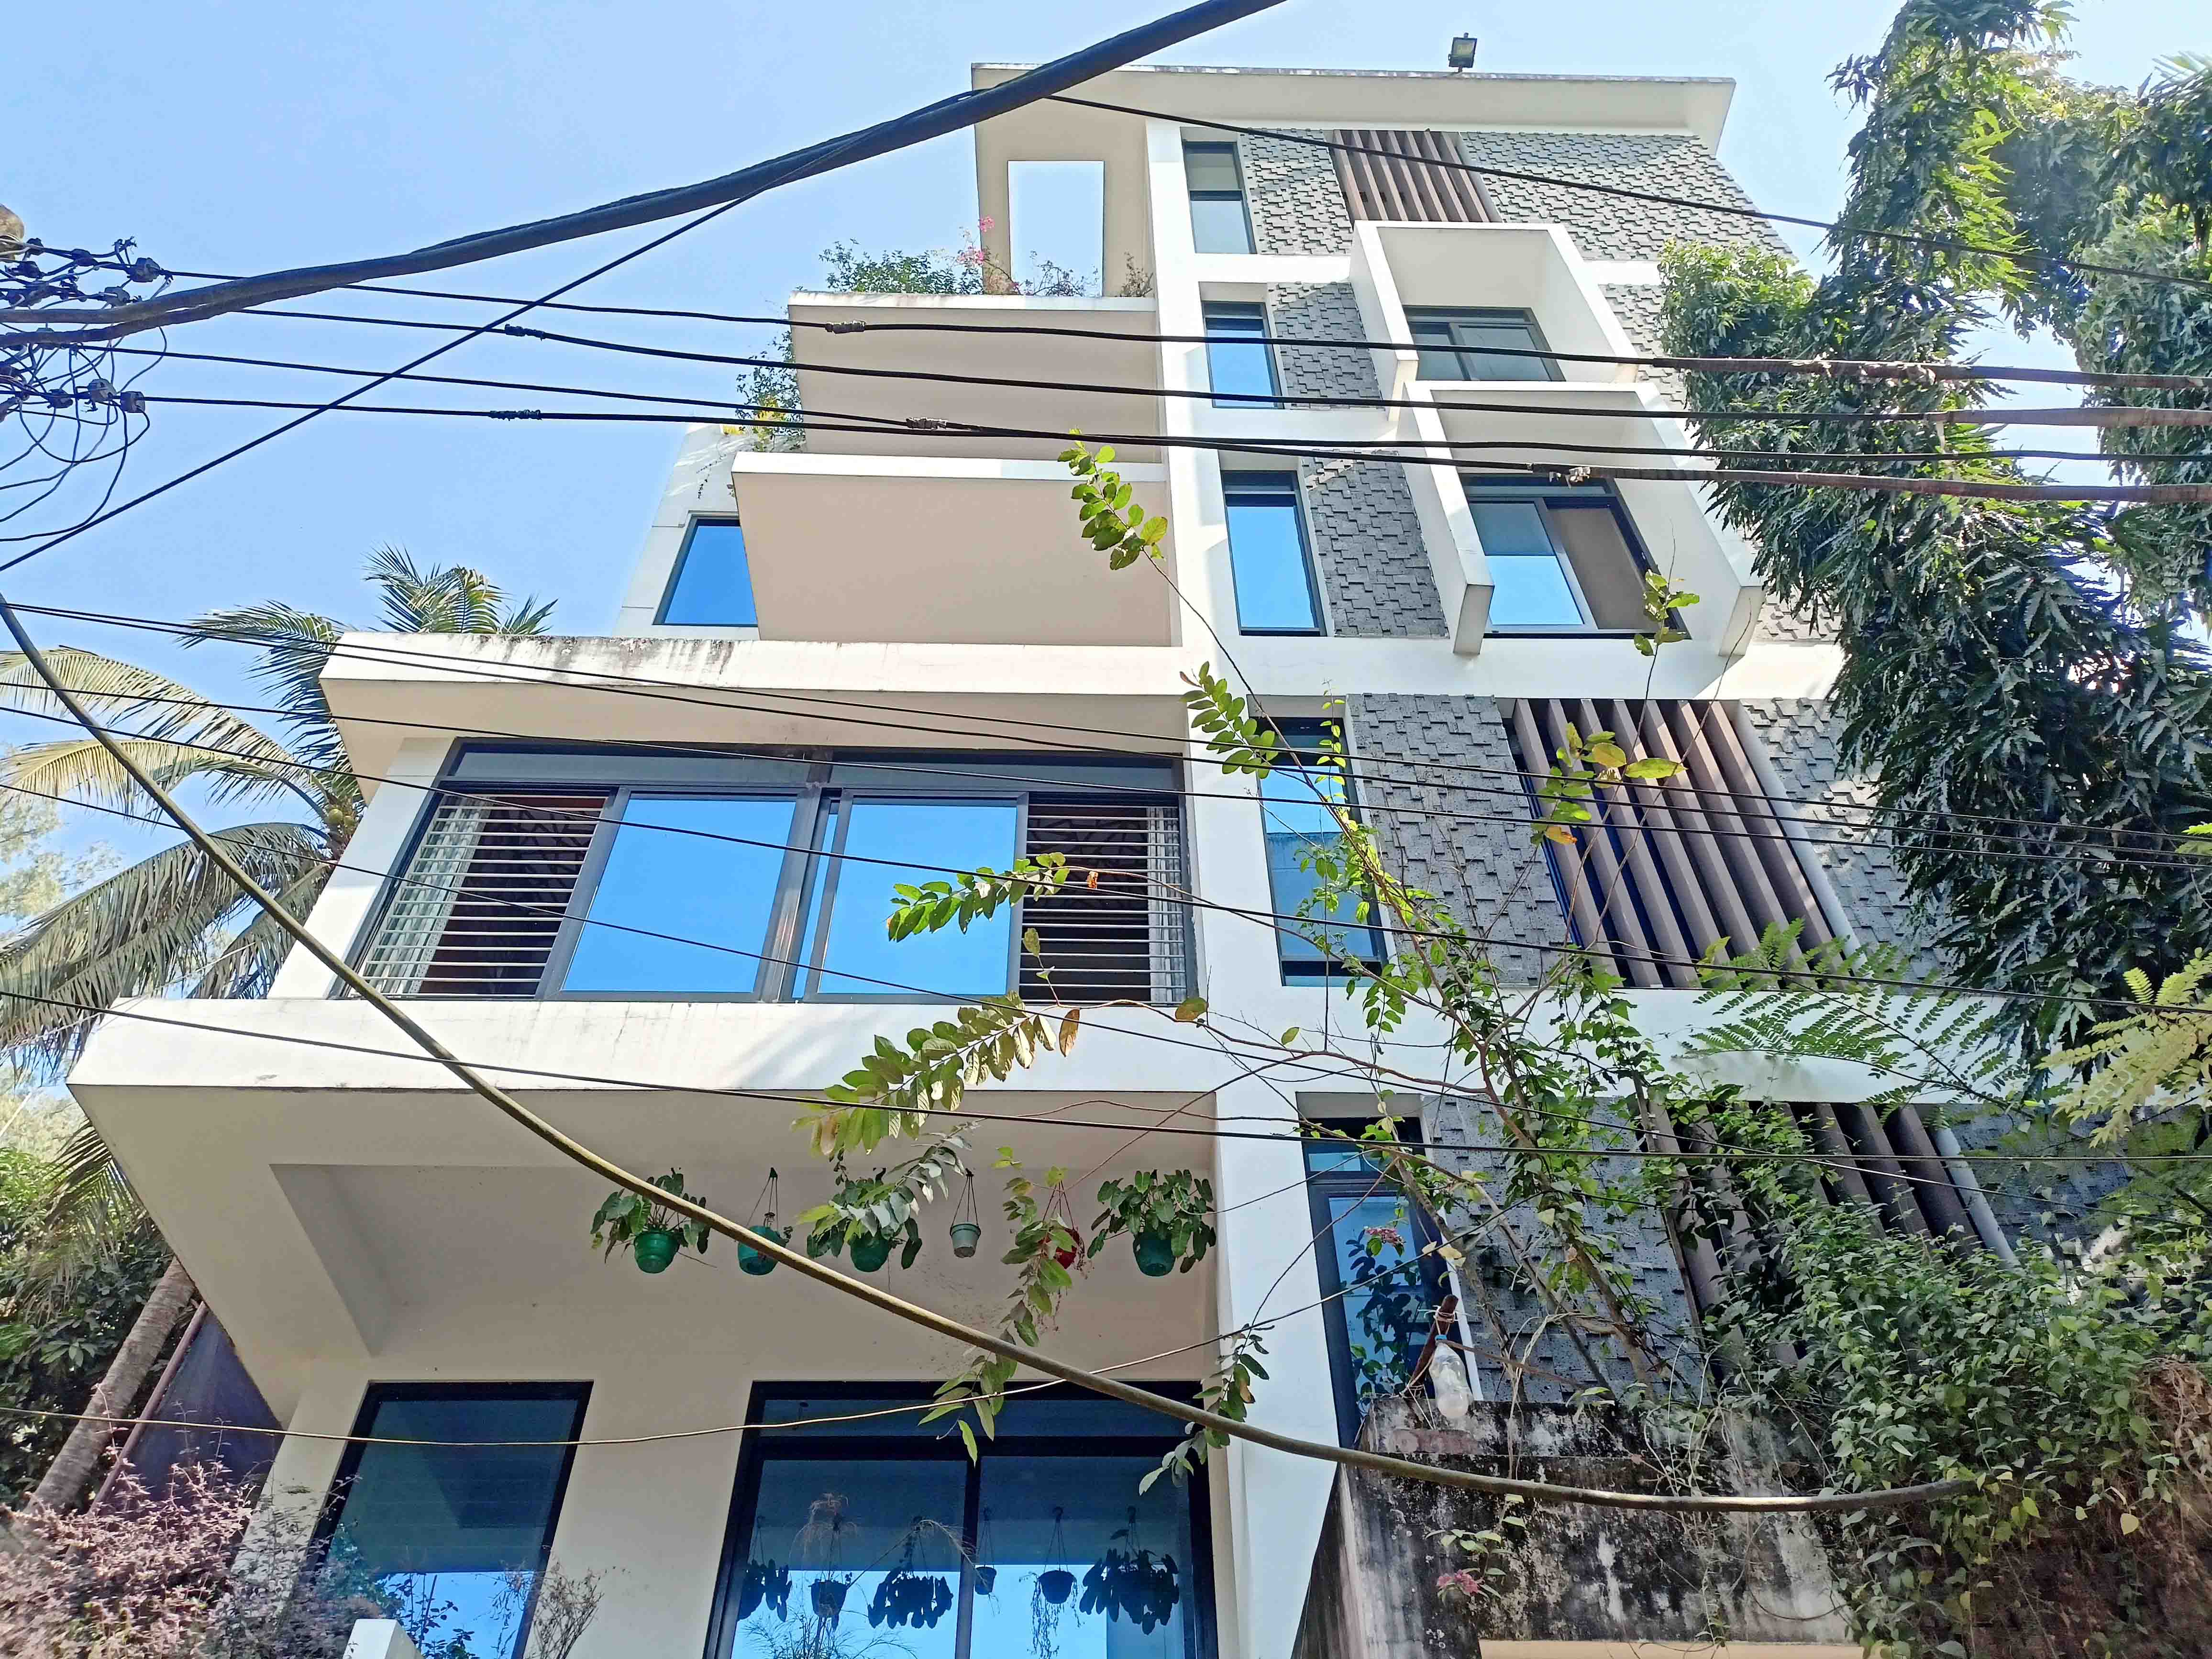 Amjad Chy Residence at Summer Hill, Chattogram